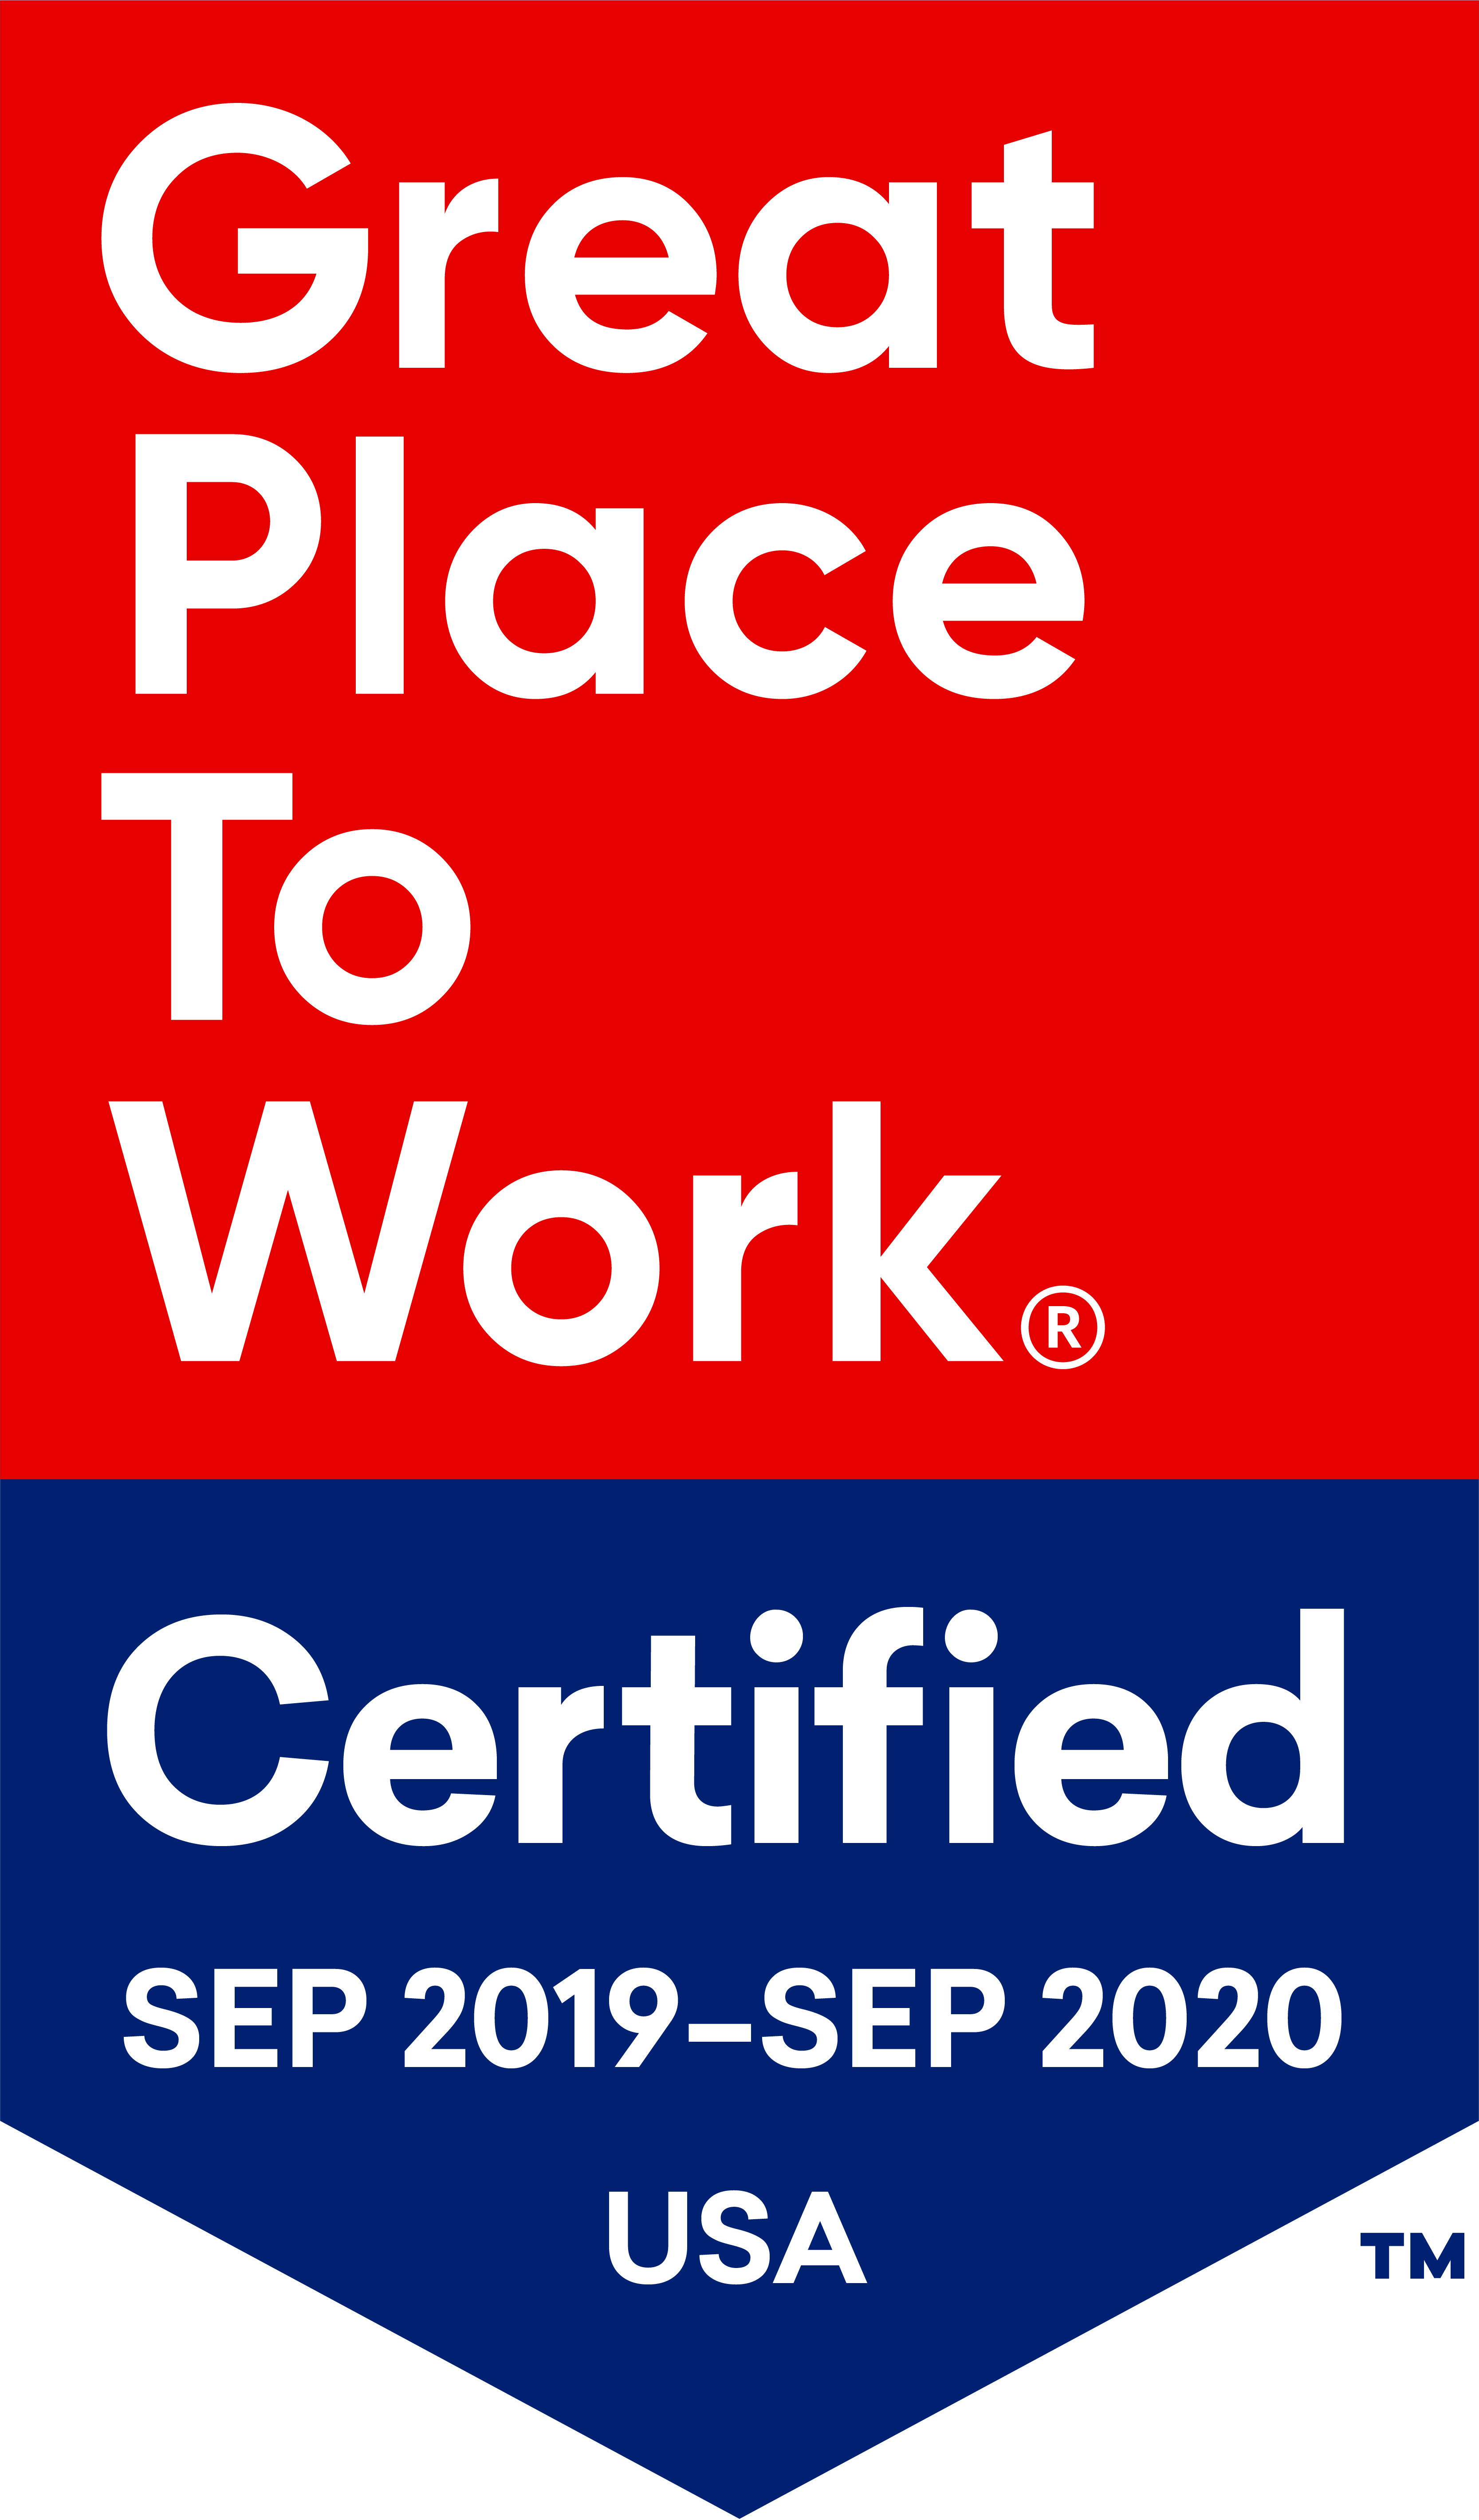 Root Inc. Certified a Great Place to Work Workplace for 2019-2020